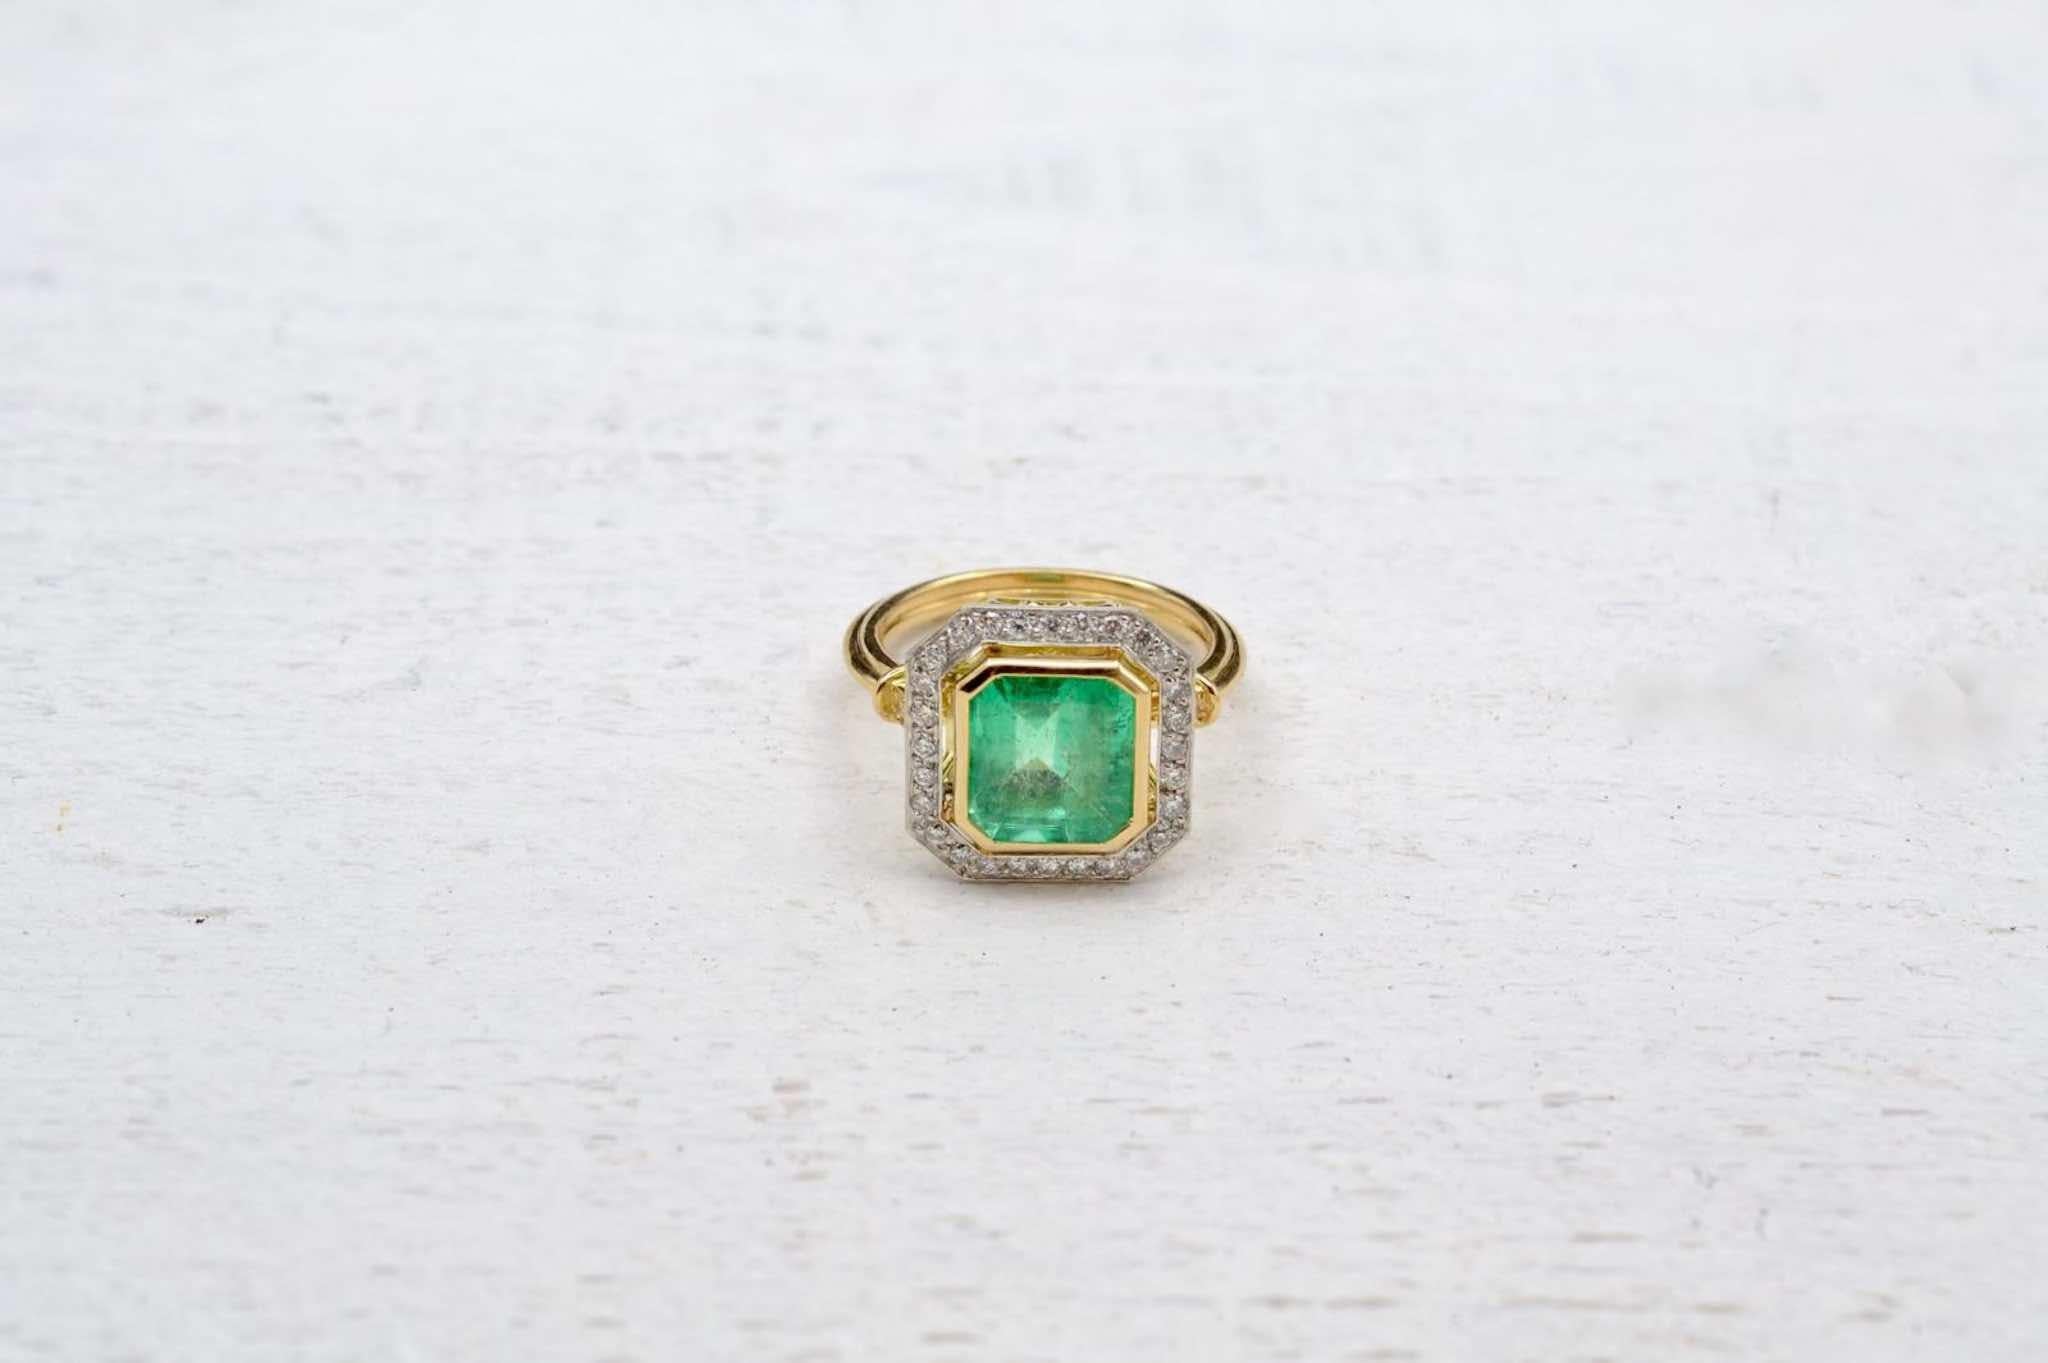 Stones: 3.15 carats Colombian Emerald
and diamonds for a total weight of 0.36 carats.
Material: 18k yellow gold and platinum
Dimensions: 9 x 9 mm
Weight: 6g
Size: 52 (free sizing)
Certificate
Ref. : 23838 / 24149